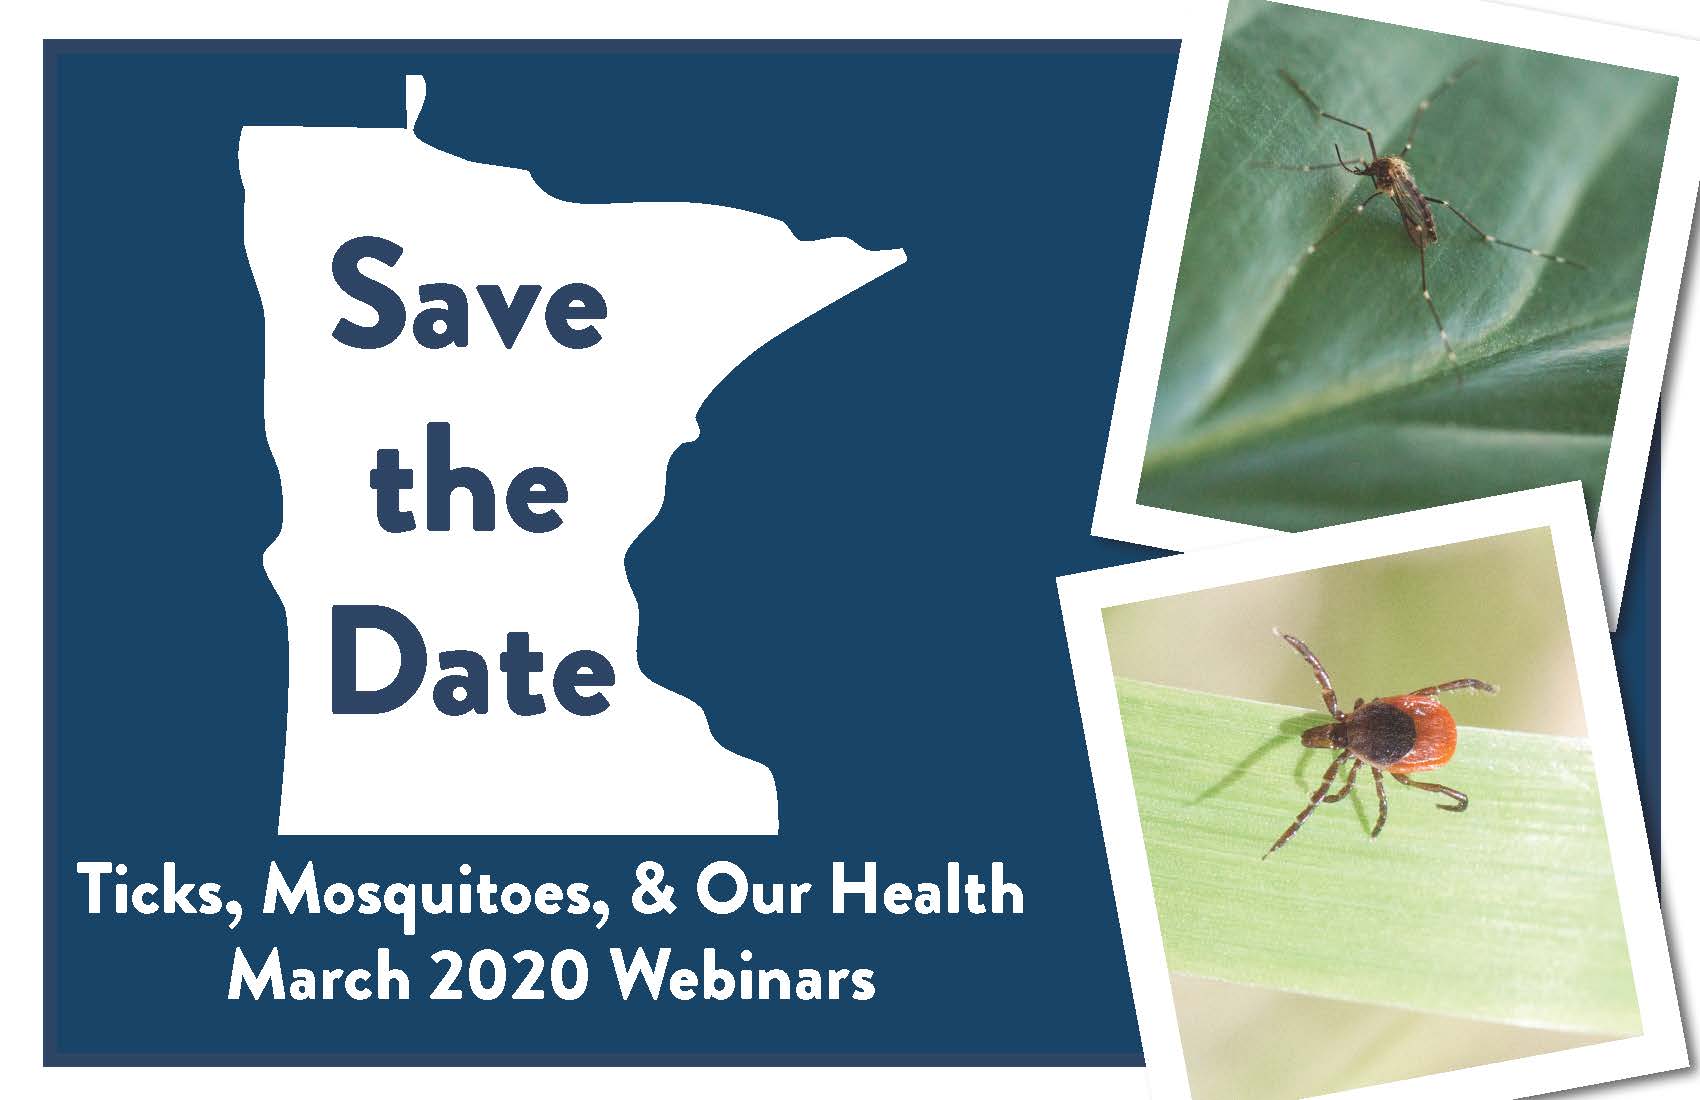 Ticks, Mosquitoes and Our Health Webinars